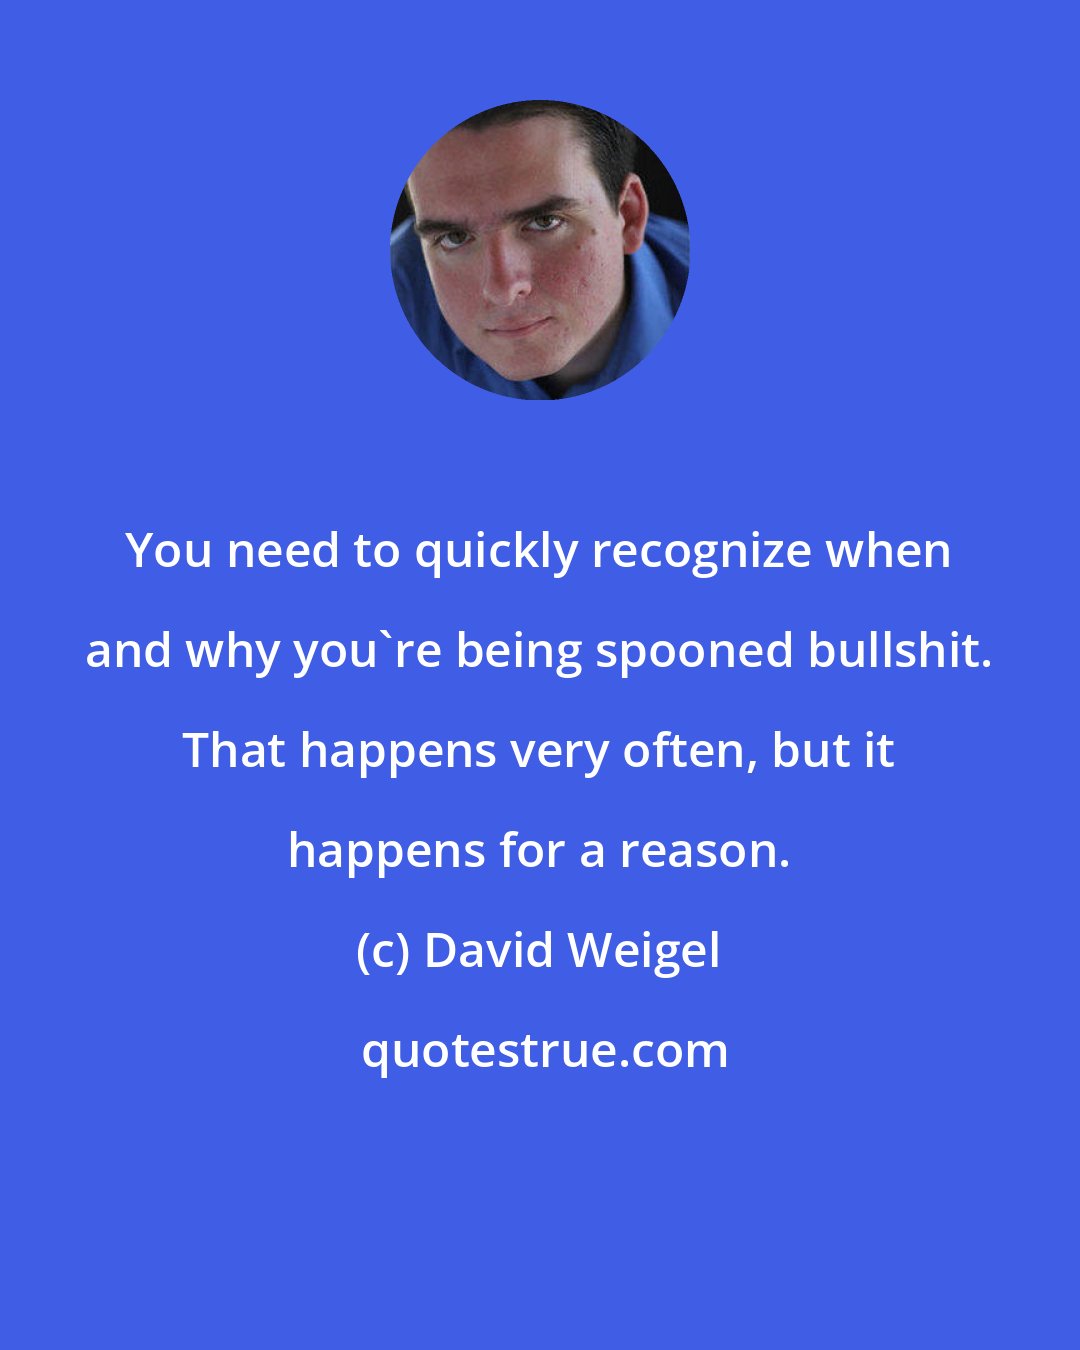 David Weigel: You need to quickly recognize when and why you're being spooned bullshit. That happens very often, but it happens for a reason.